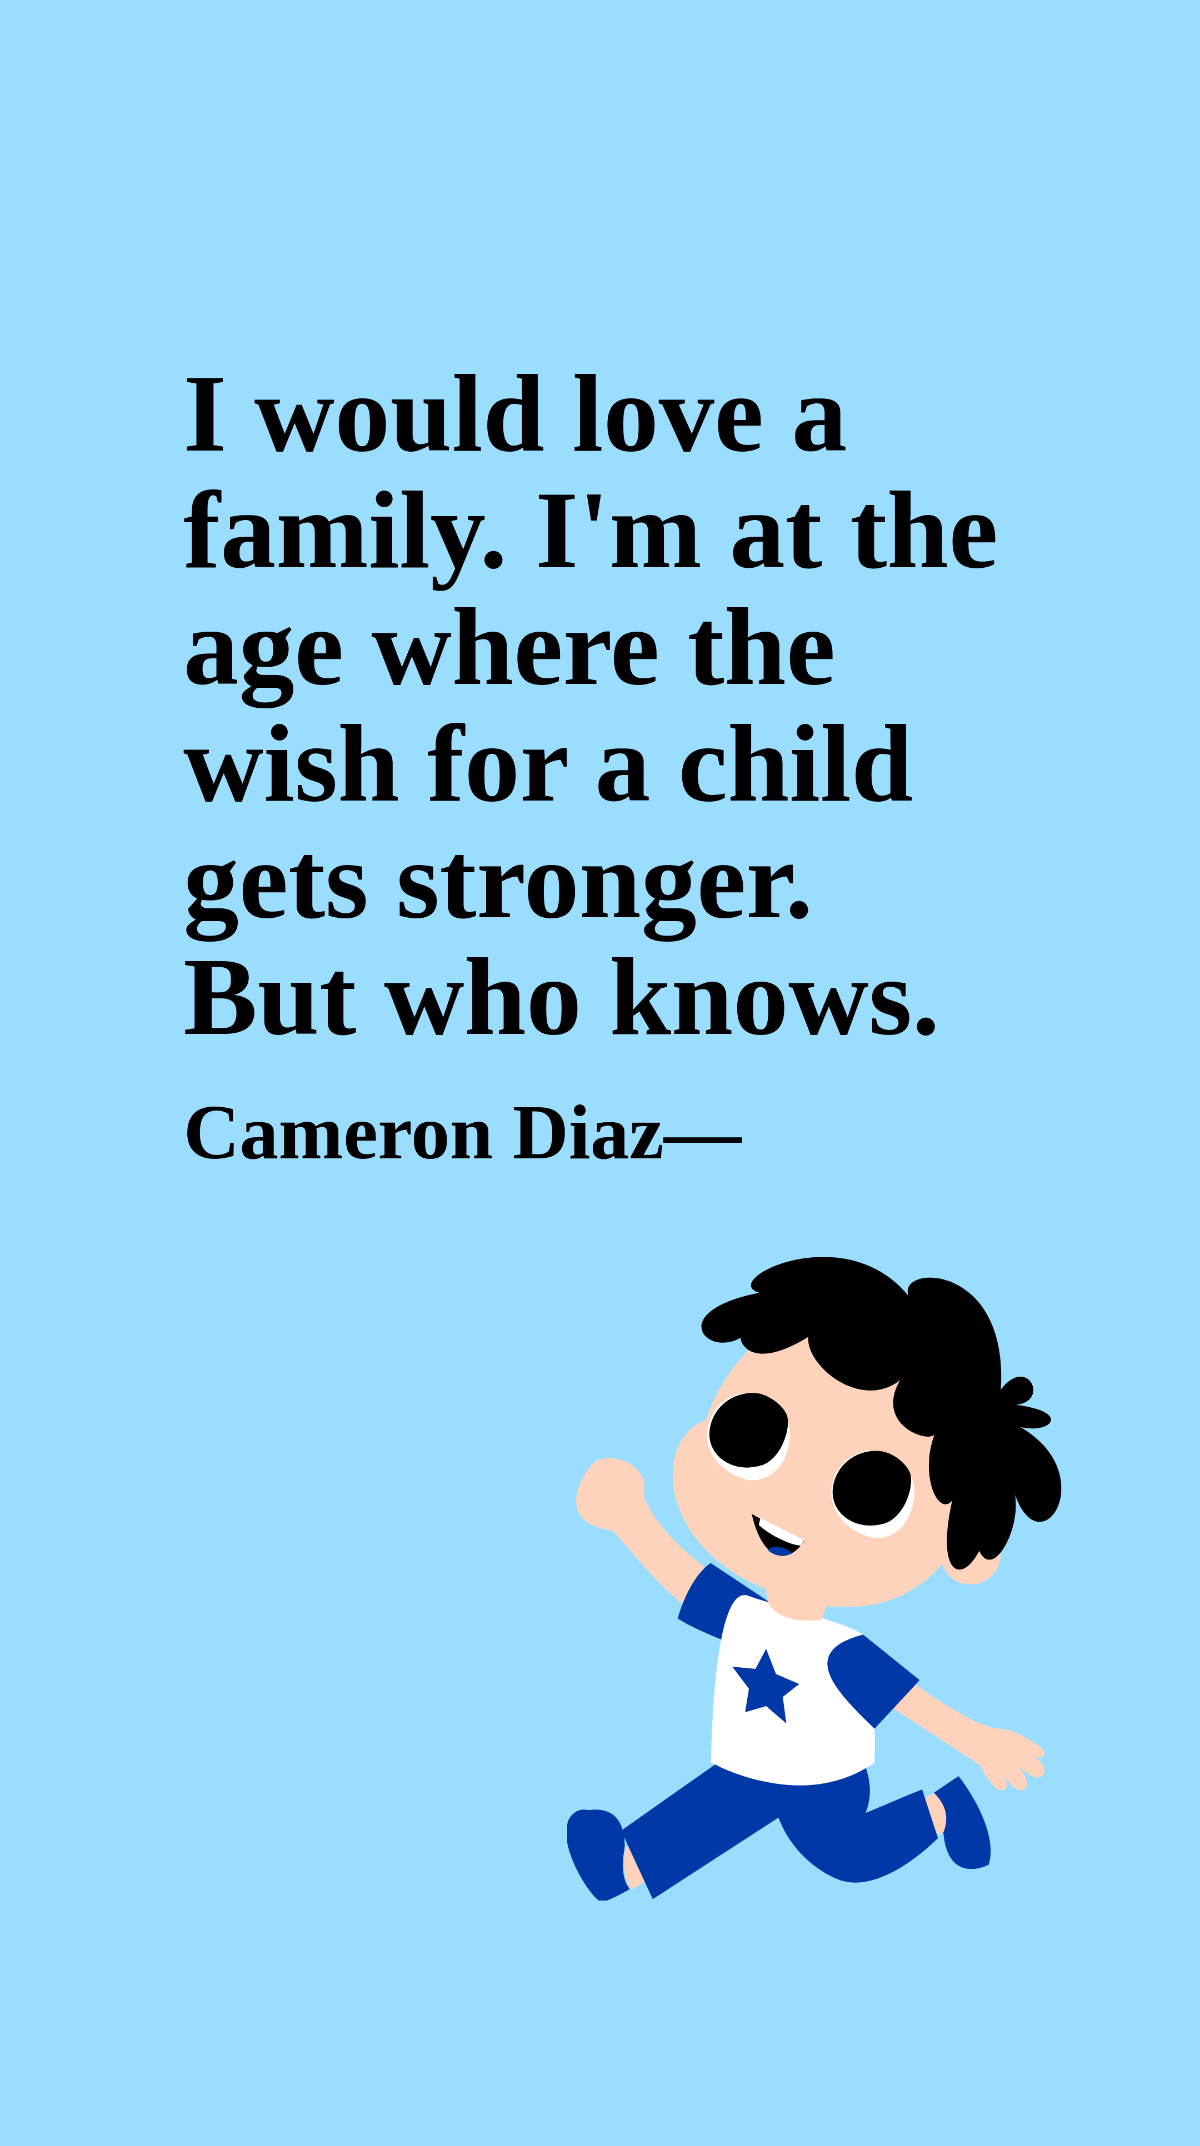 Cameron Diaz - I would love a family. I'm at the age where the wish for a child gets stronger. But who knows. Template